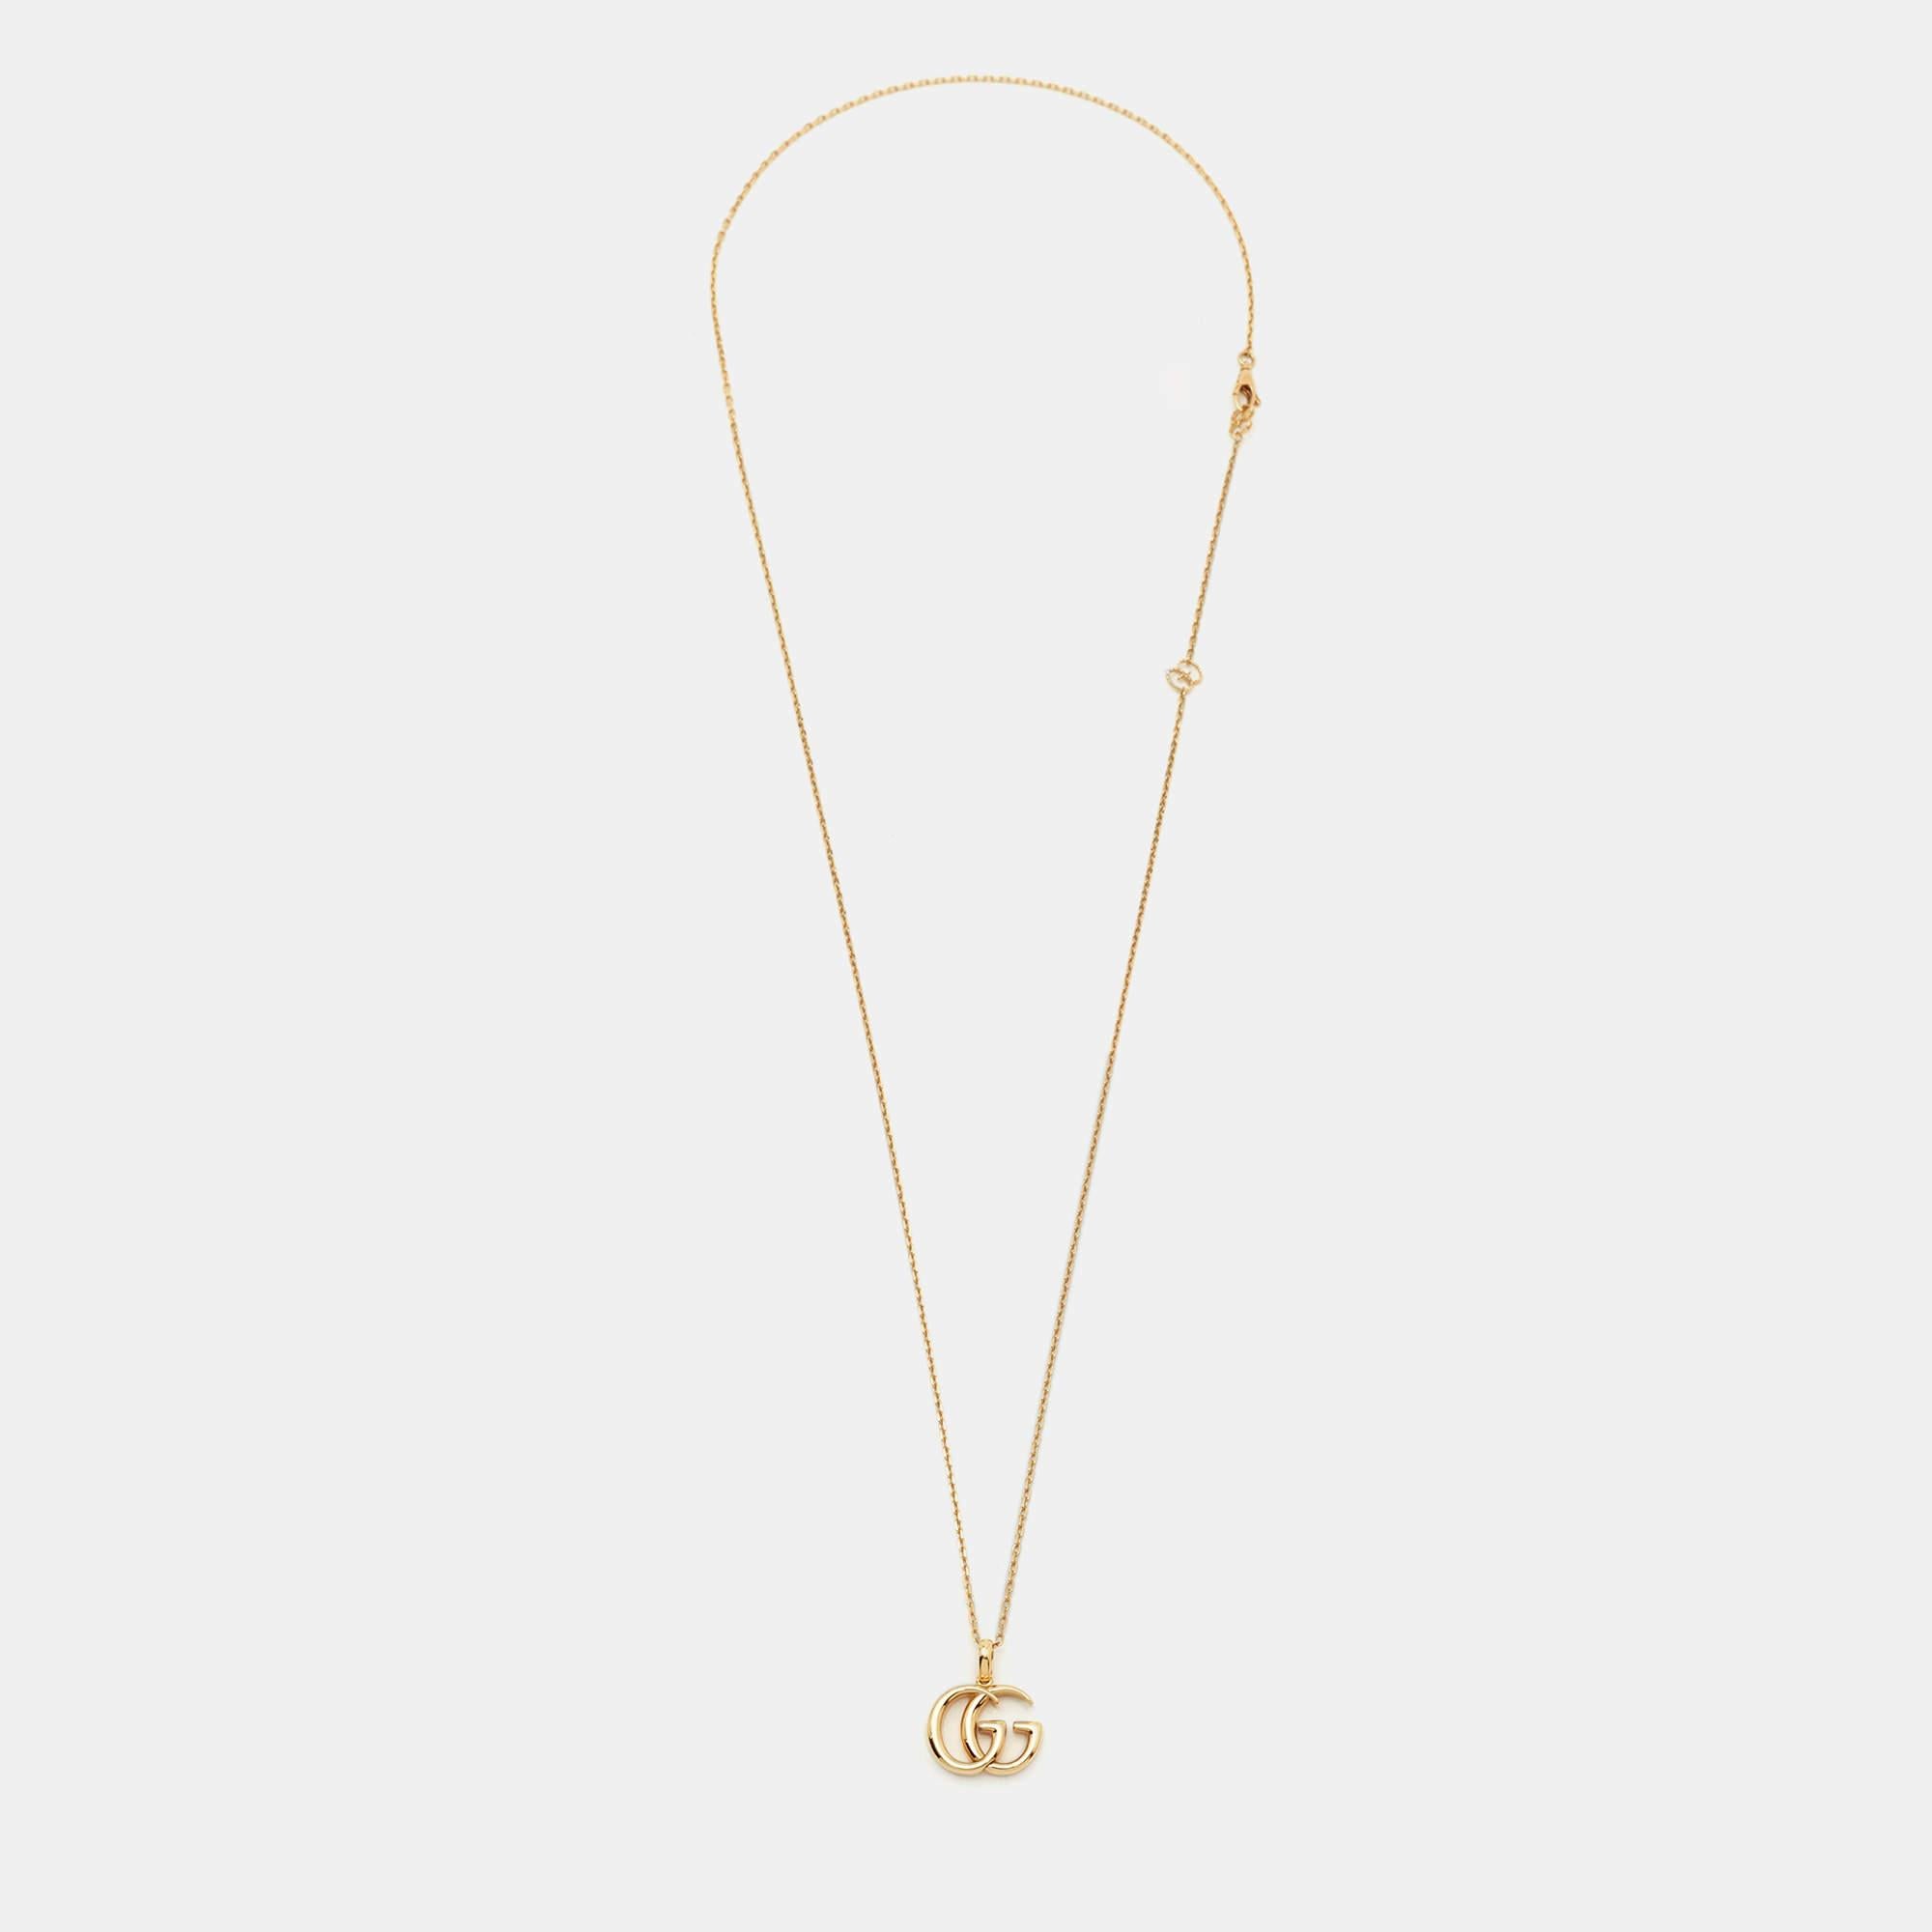 This lovely pendant necklace from Gucci is sure to become one of your favorite accessories! It comes crafted from 18k yellow gold, and the chain carries a Double G pendant.

Includes: Original Case

